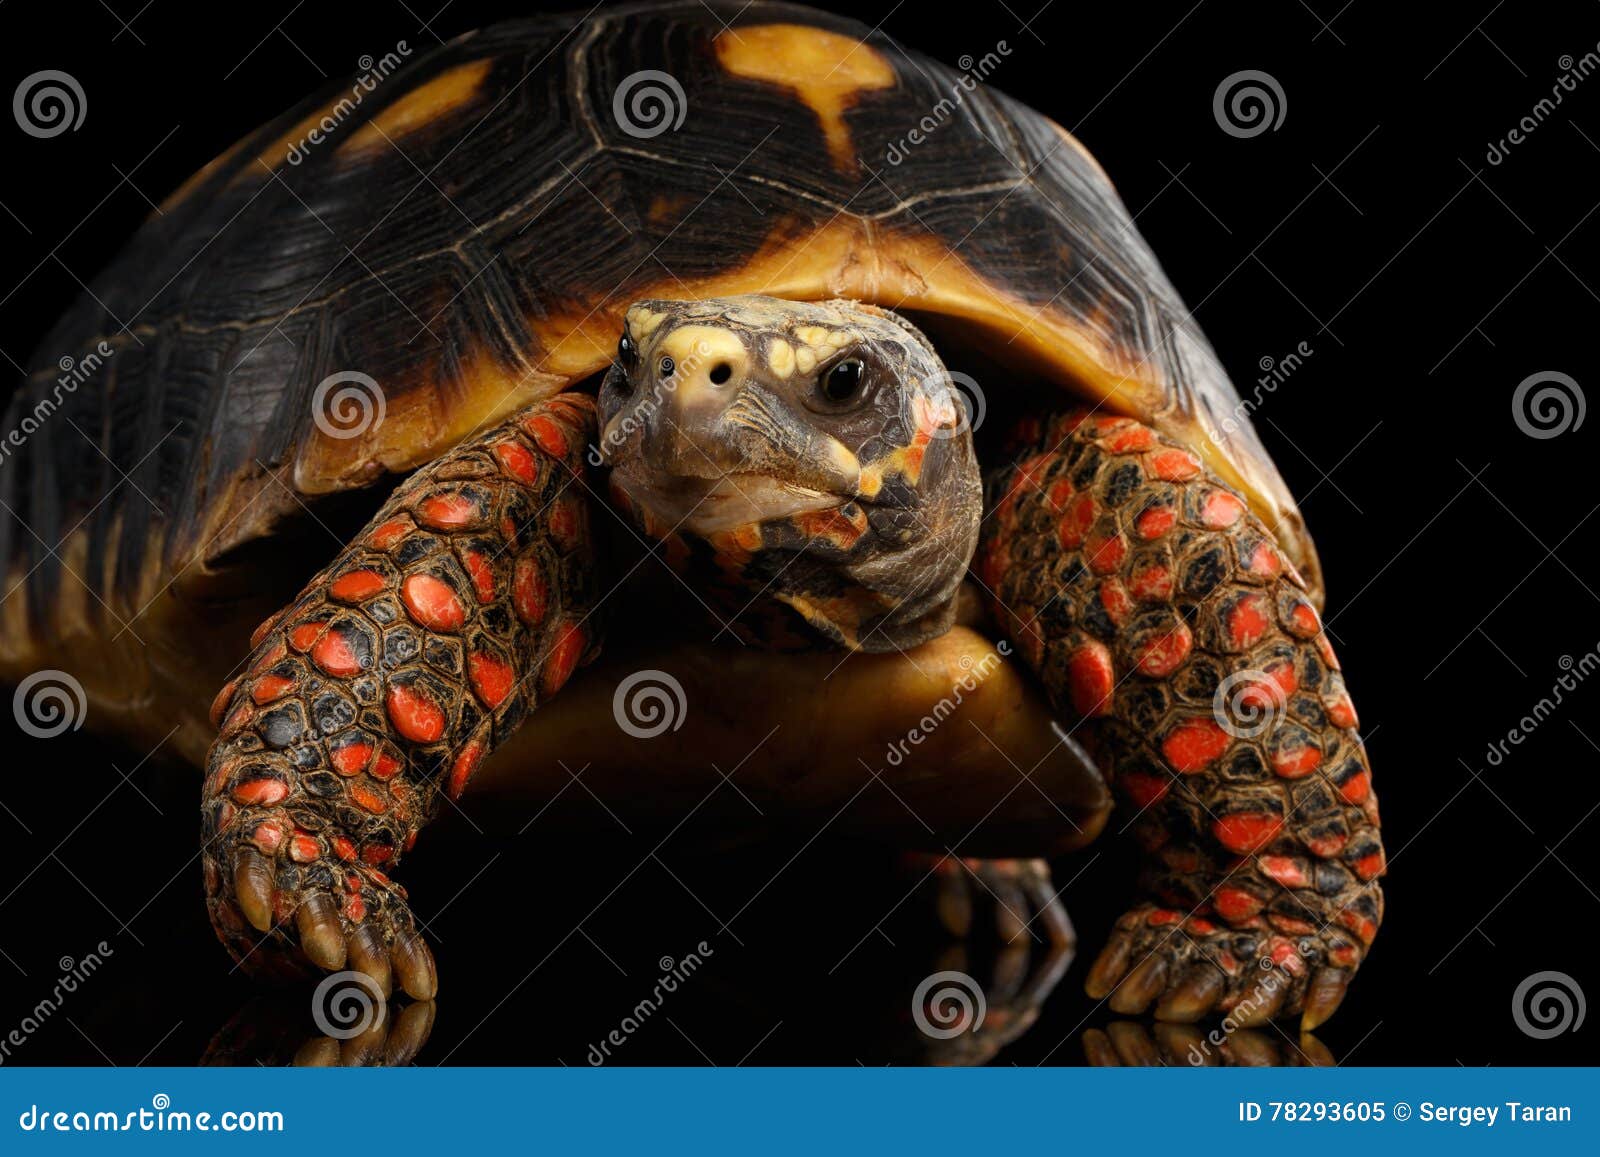 close-up of red-footed tortoises, chelonoidis carbonaria,  black background